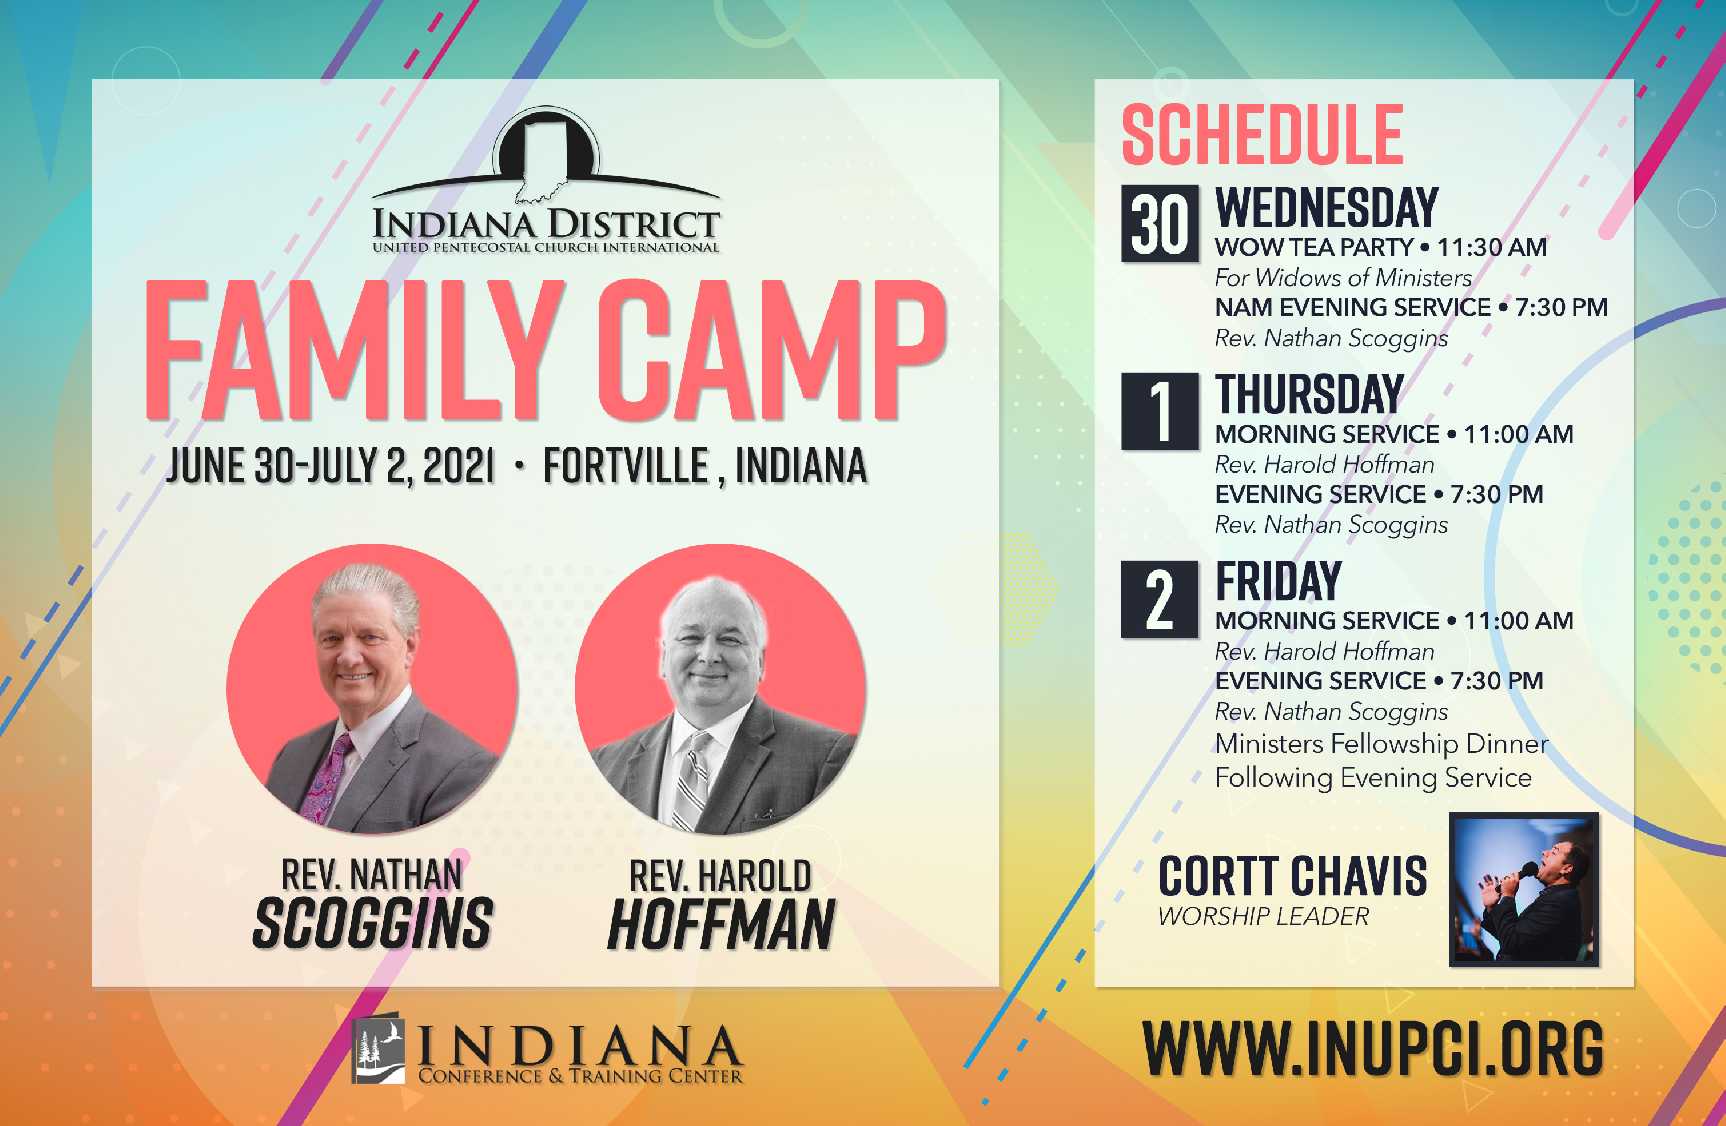 Advertisements – Indiana District UPCI